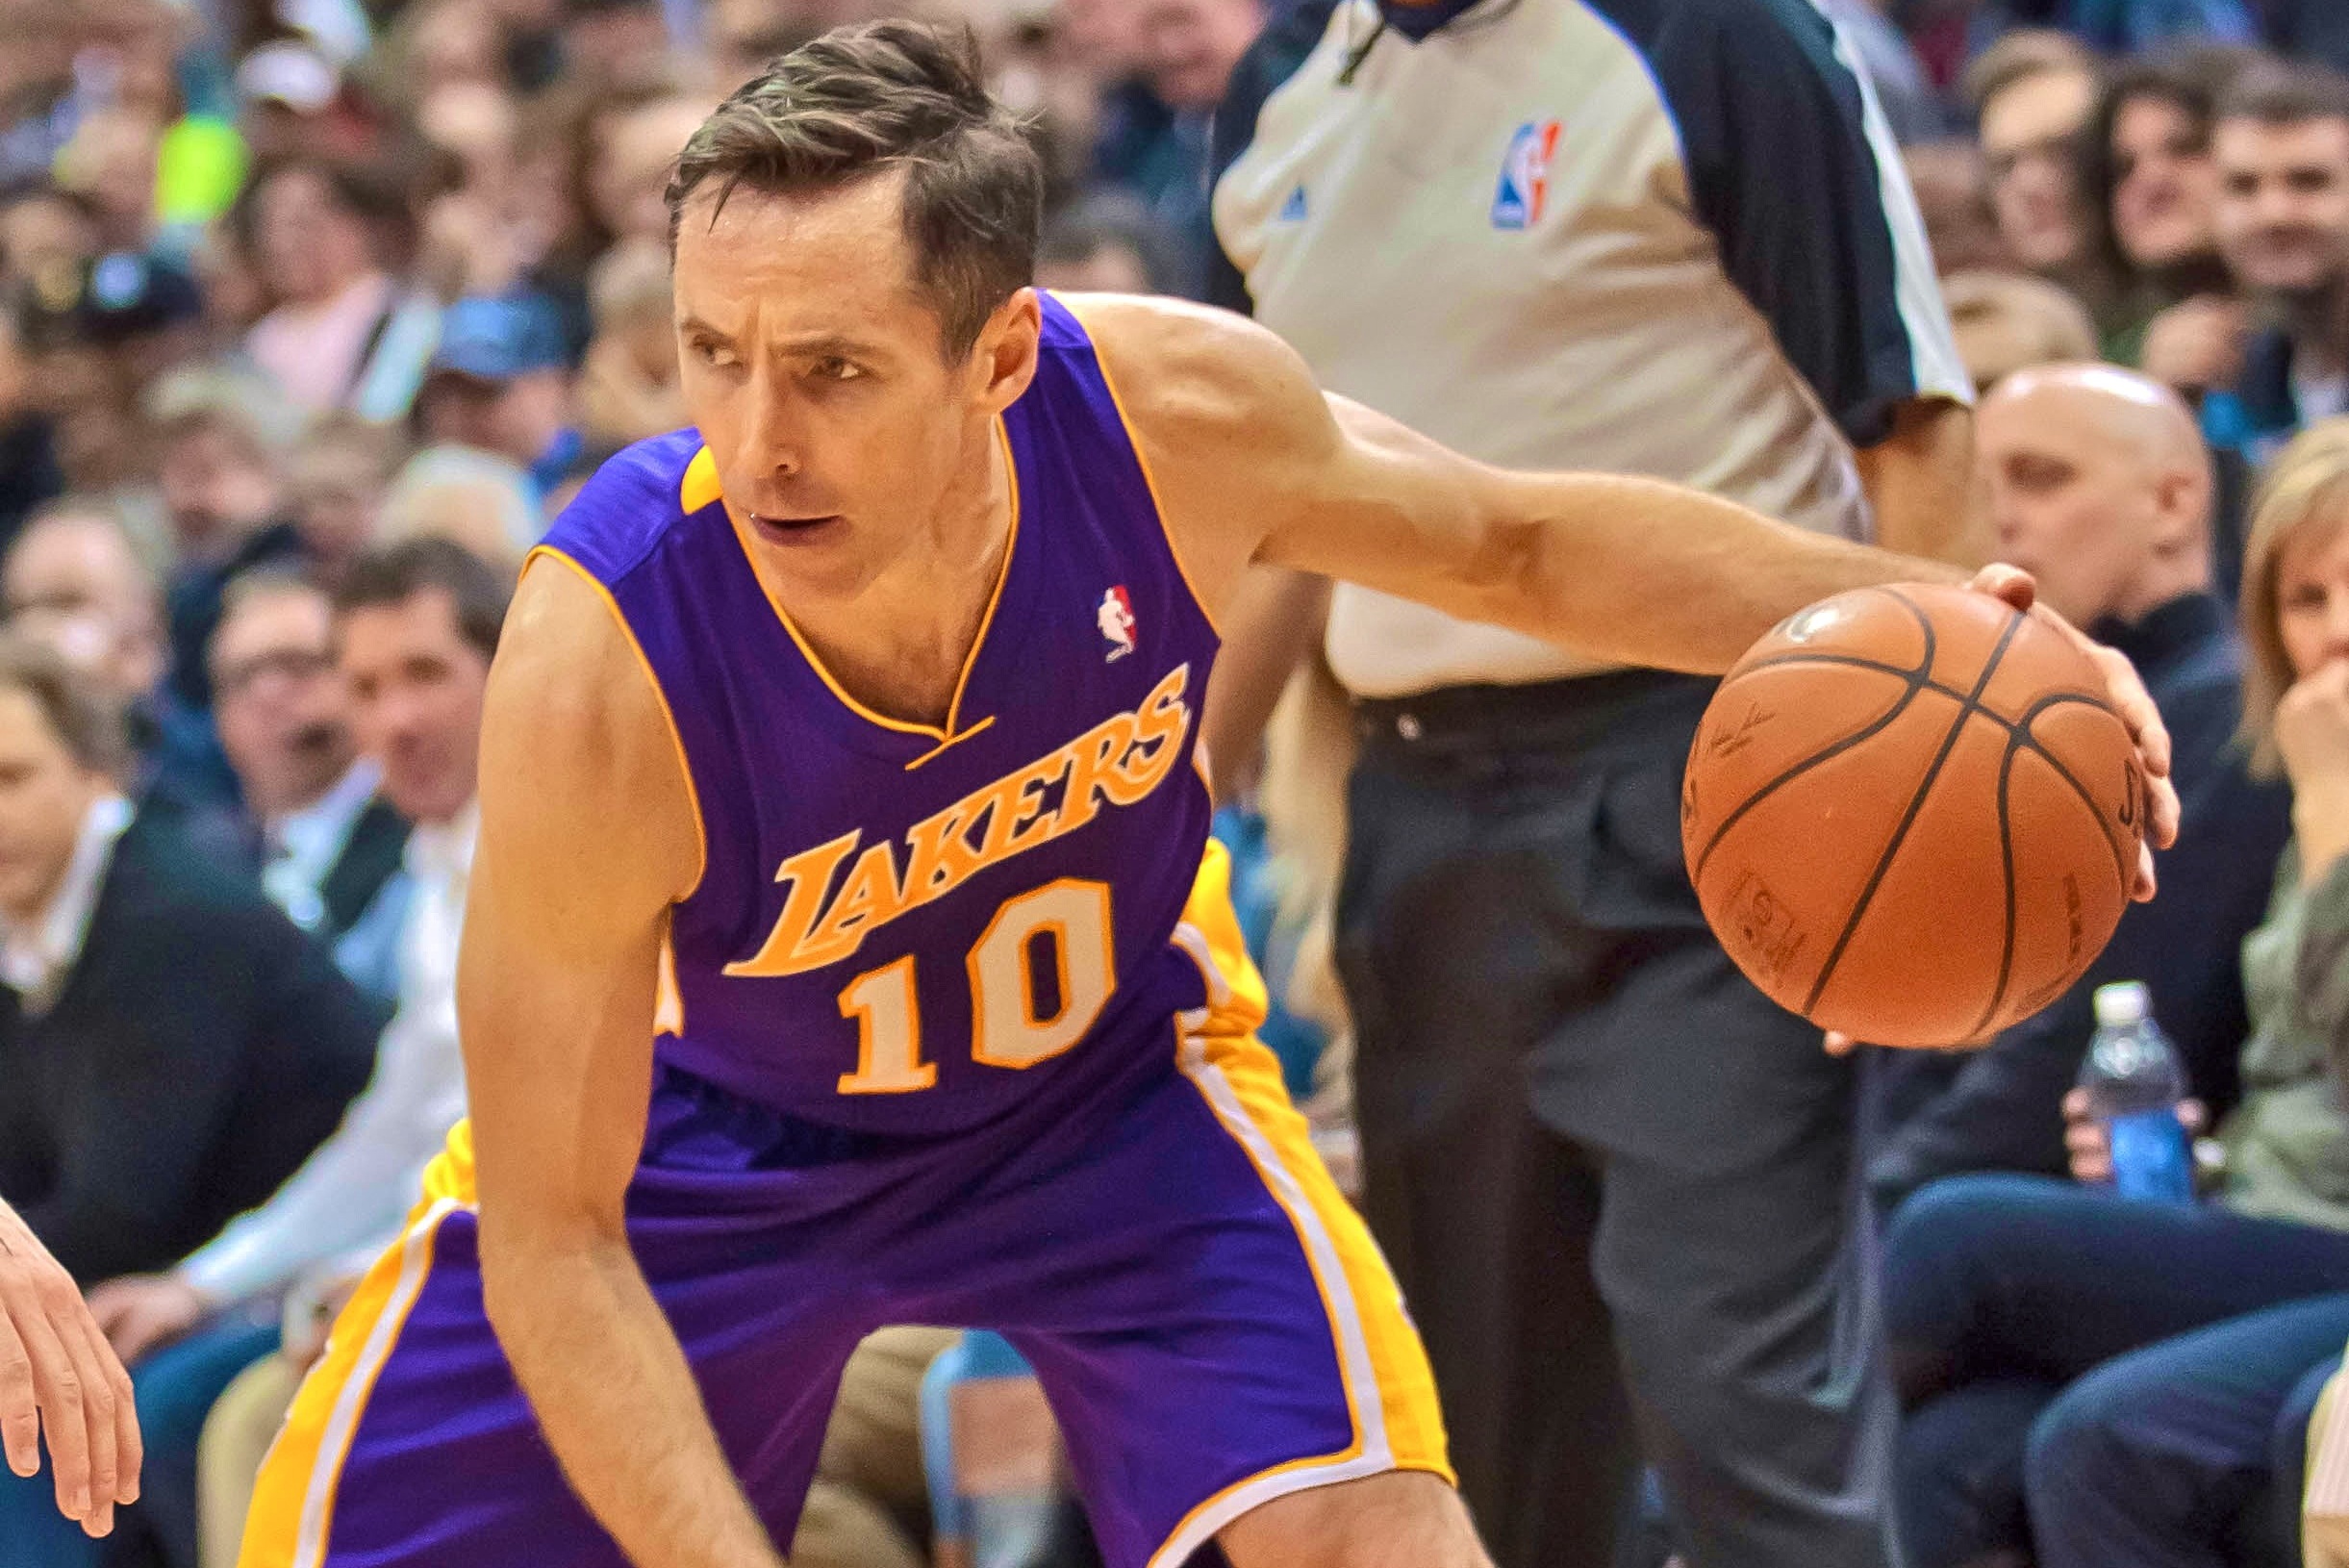 Steve Nash, oldest player in NBA, says 'I've got a lot to prove